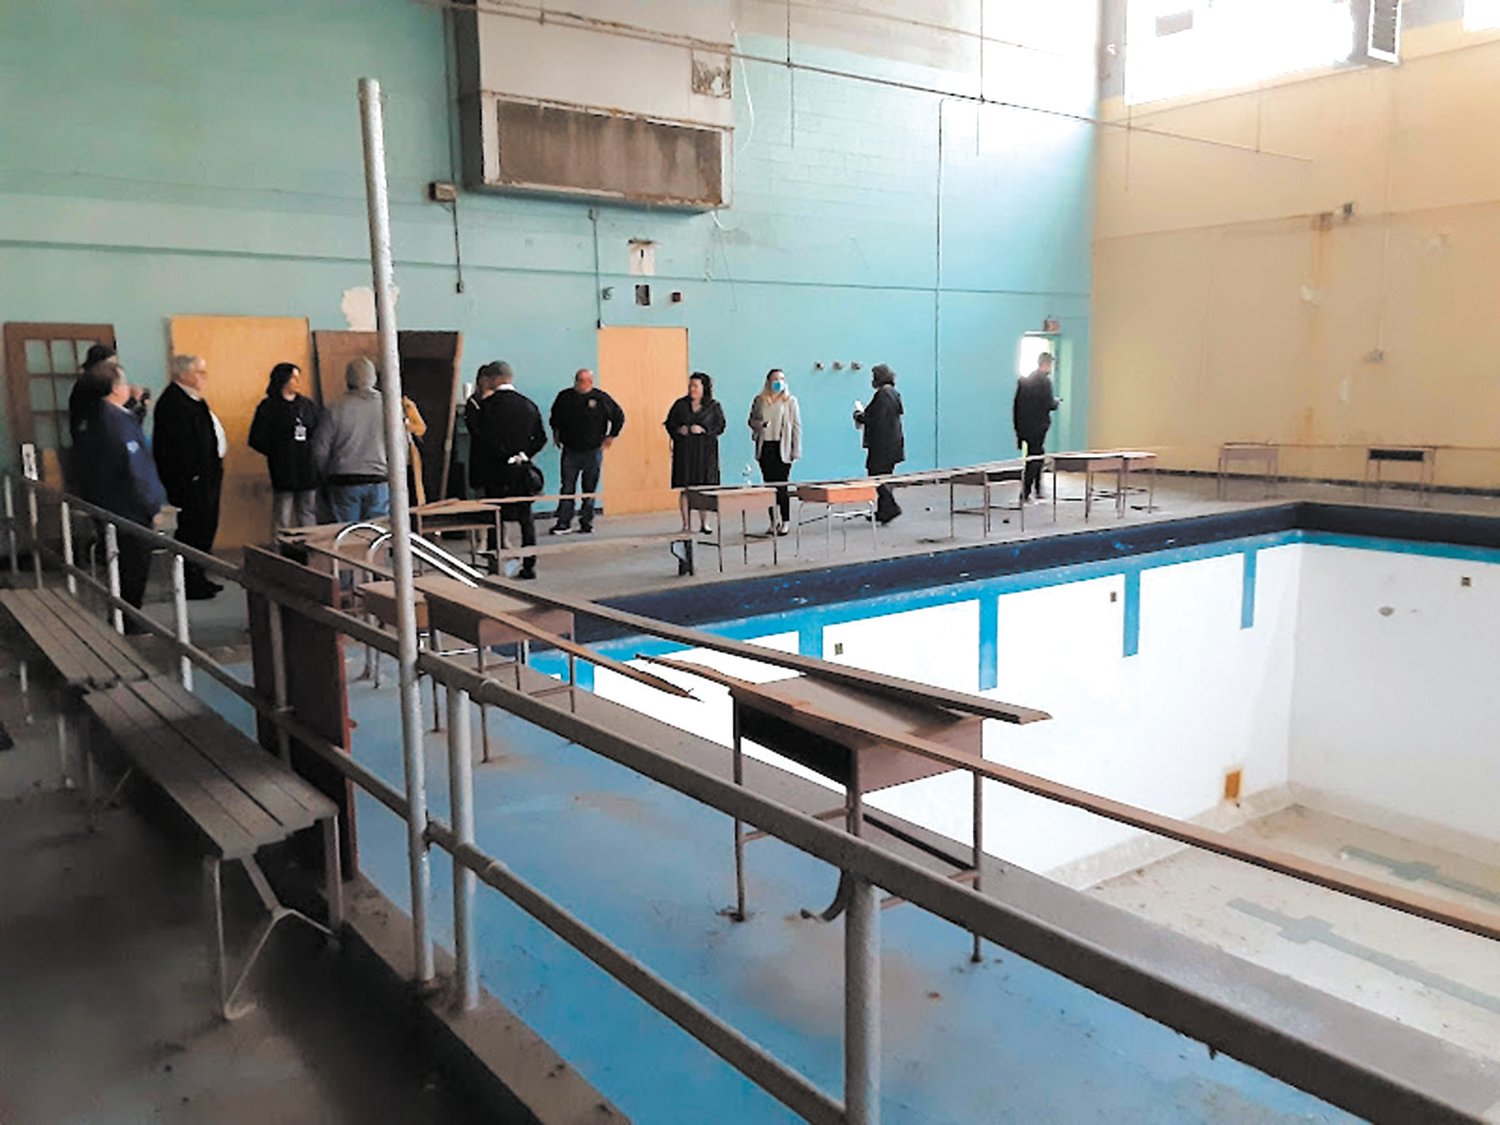 UNUSABLE SPACE: The tour of Gladstone Elementary School included a visit to the pool which was formerly used to teach swimming lessons to the students who attended the school. Now it is unused space that does not impact education in any way. (Photo courtesy of Cranston Public Schools)